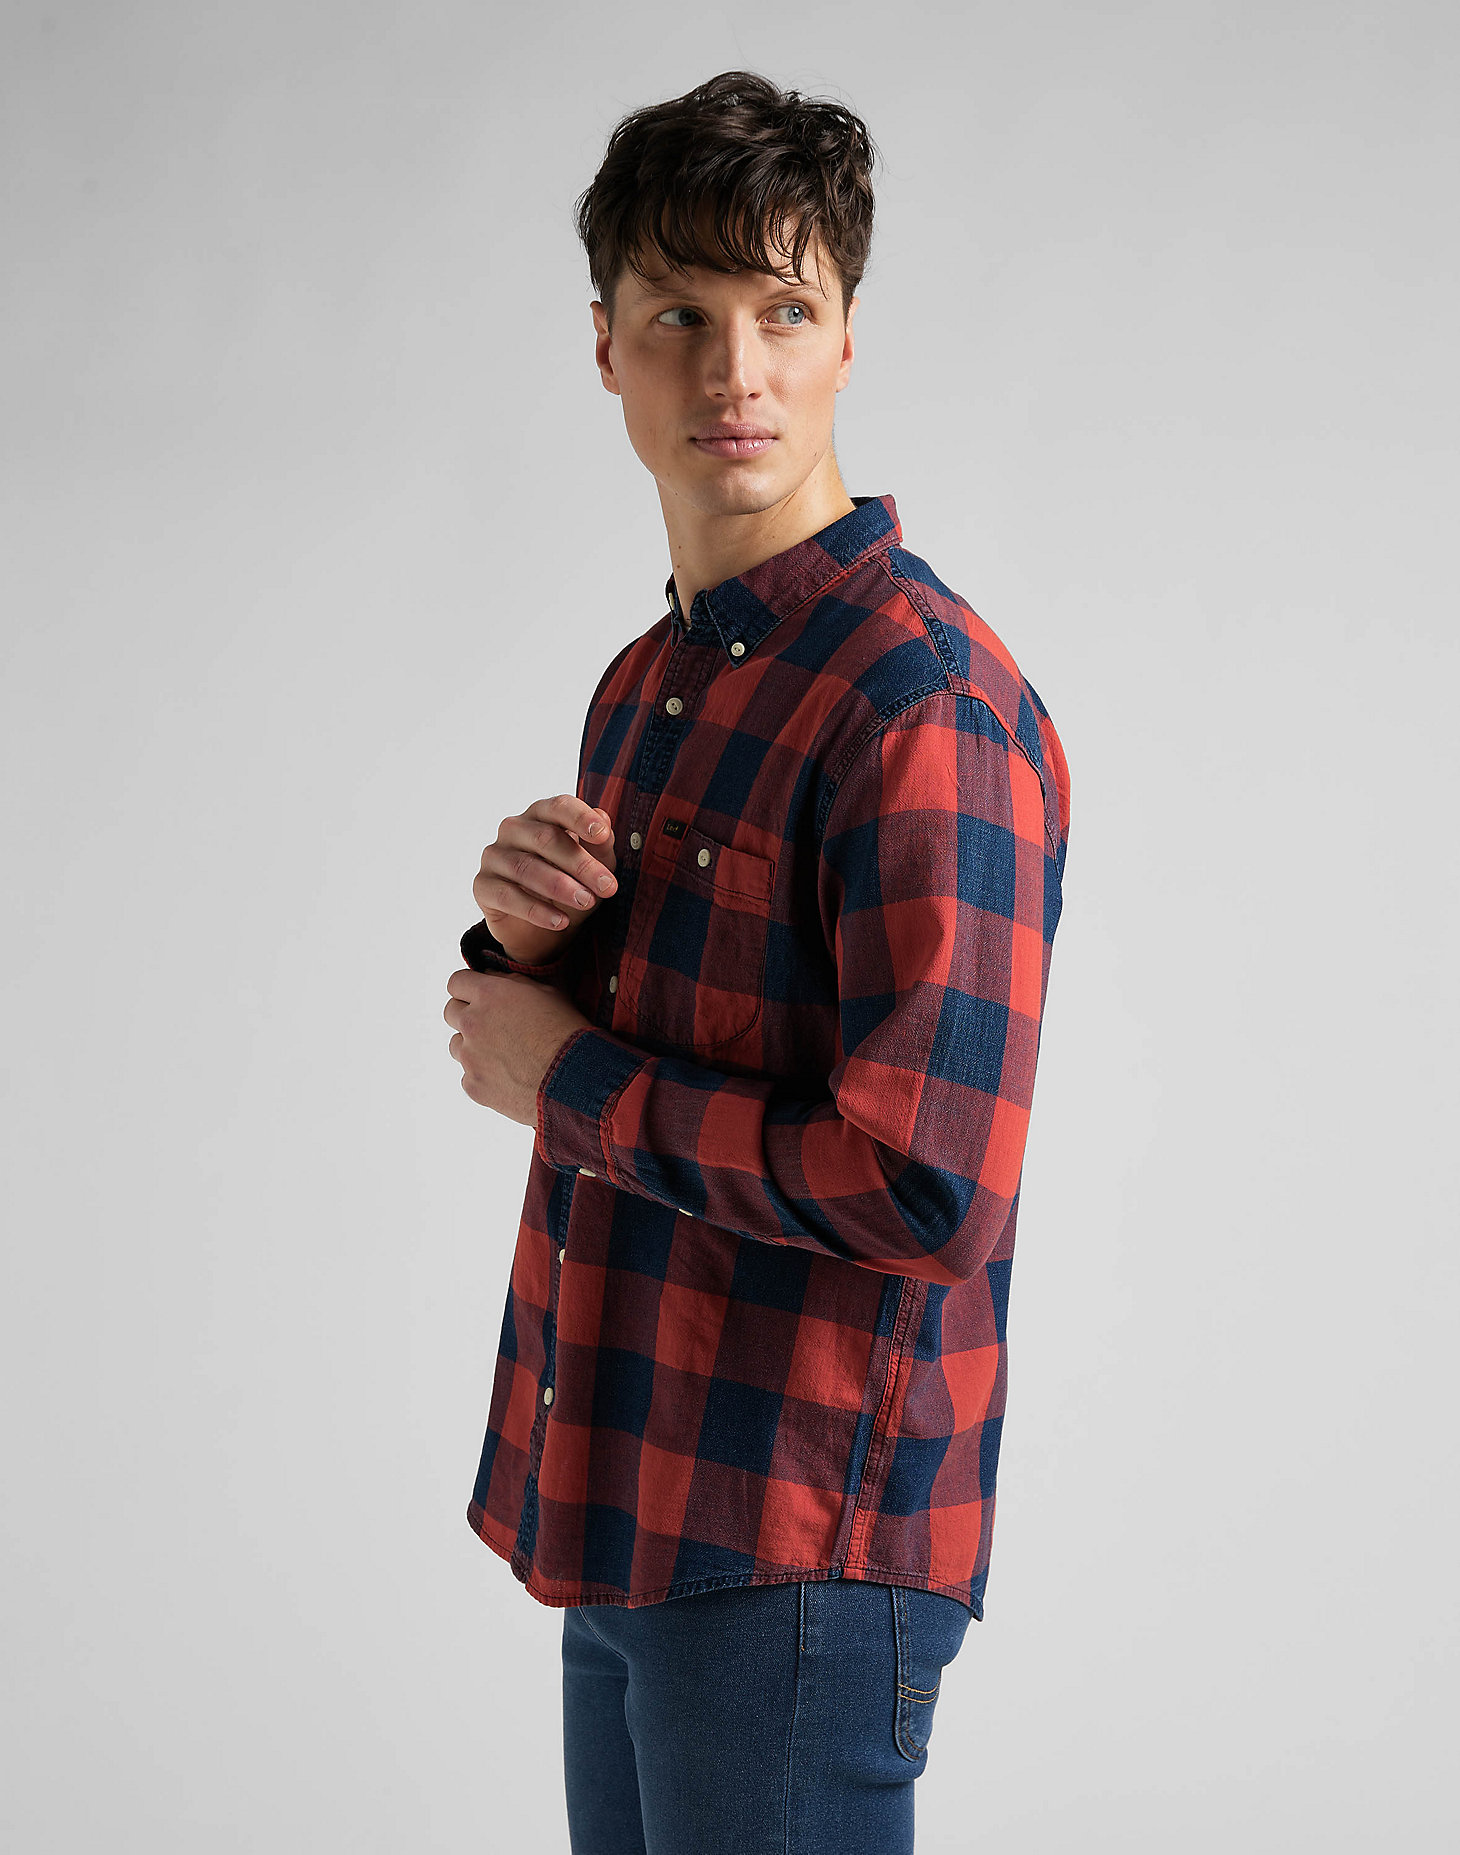 Riveted Shirt in Real Red alternative view 3